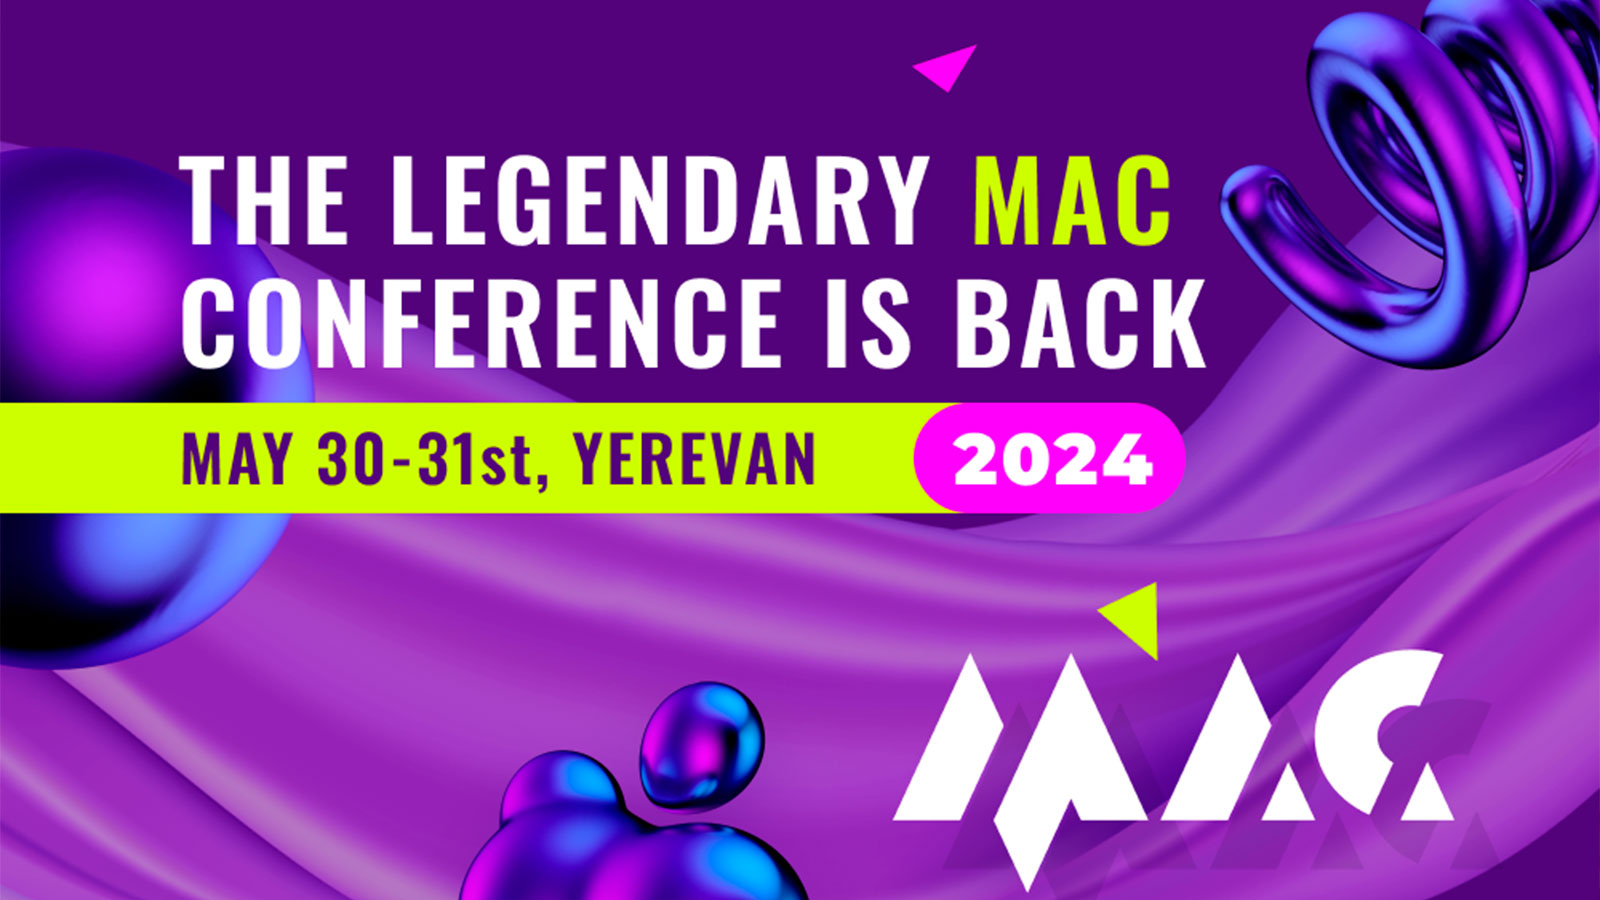 The largest MAC conference in Eastern Europe is back! 2500+ participants, 100+ companies at the exhibition, 30 reports, and a legendary Afterparty.  